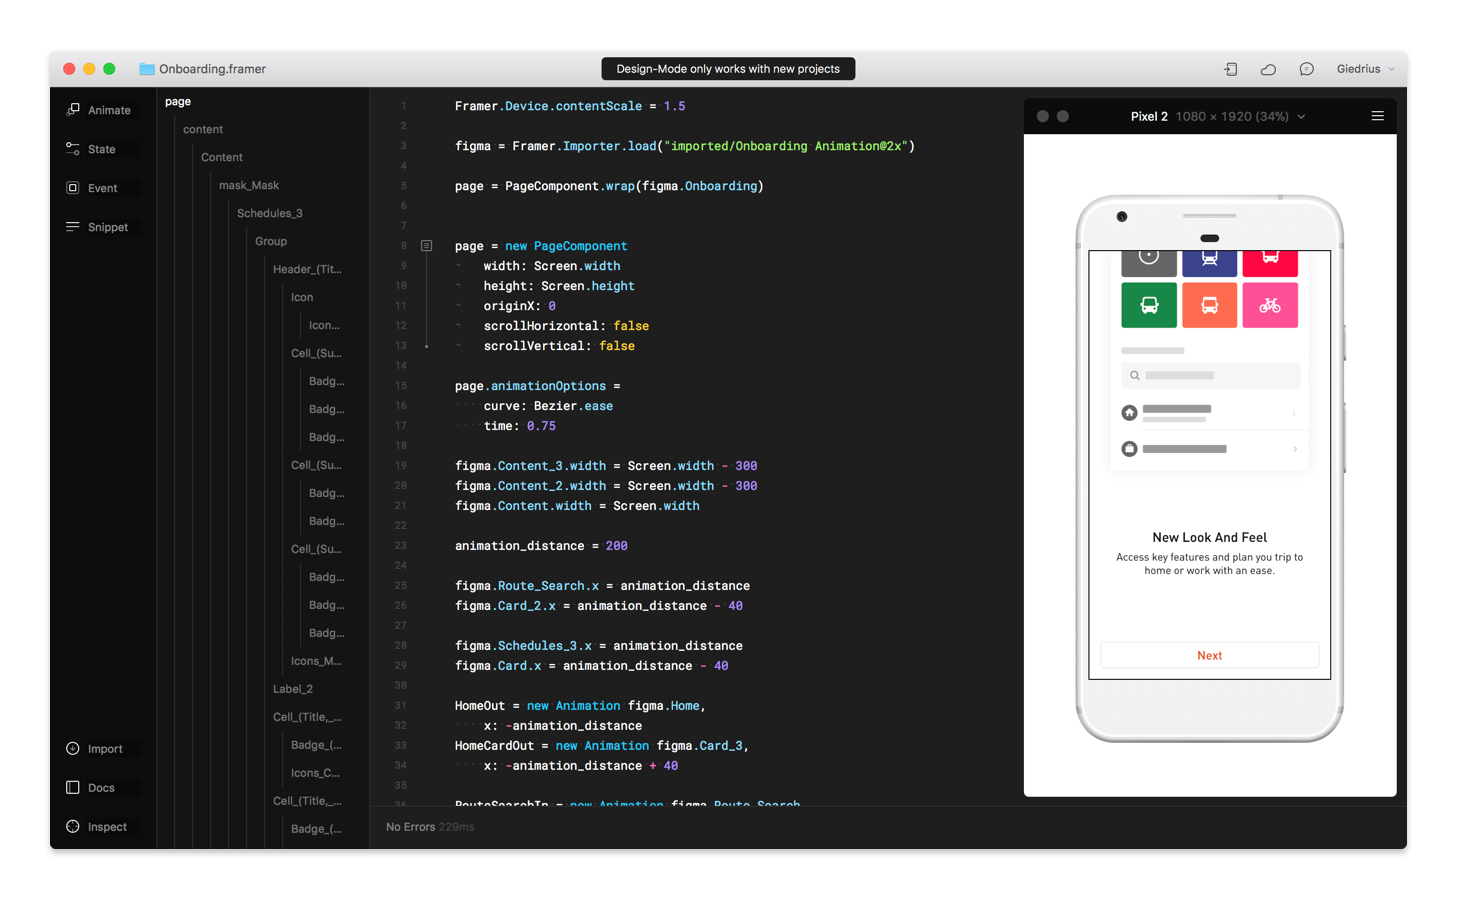 An early version of introductory onboarding prototype I’ve made using Framer.